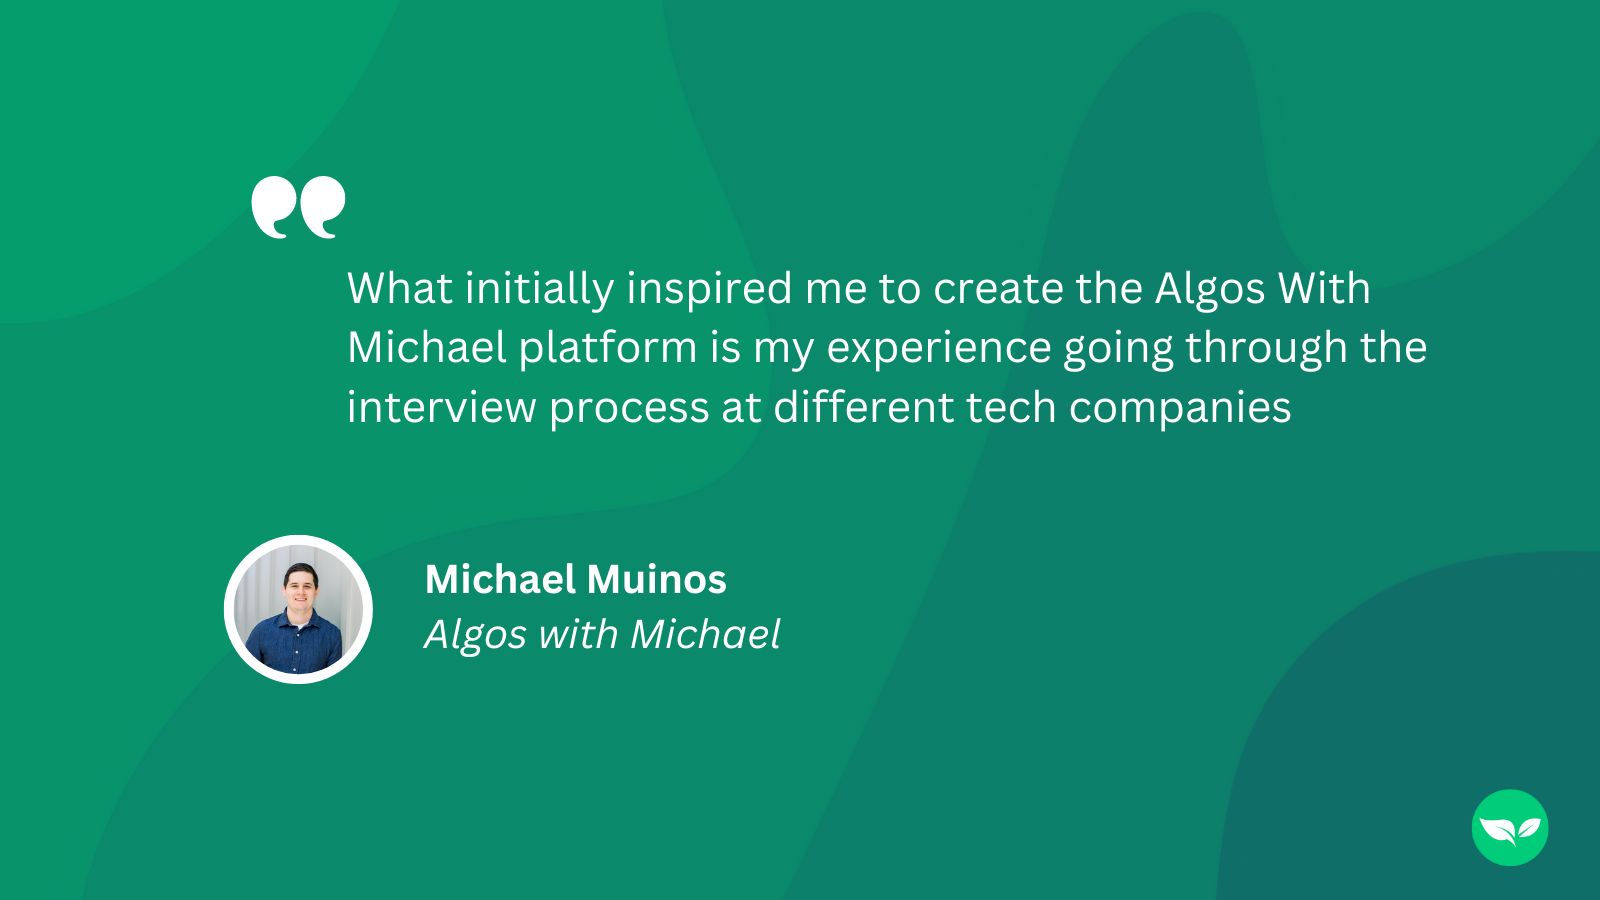 A graphic showing the following quote from Michael Muinos: "What initially inspired me to create the Algos With Michael platform is my experience going through the interview process at different tech companies"